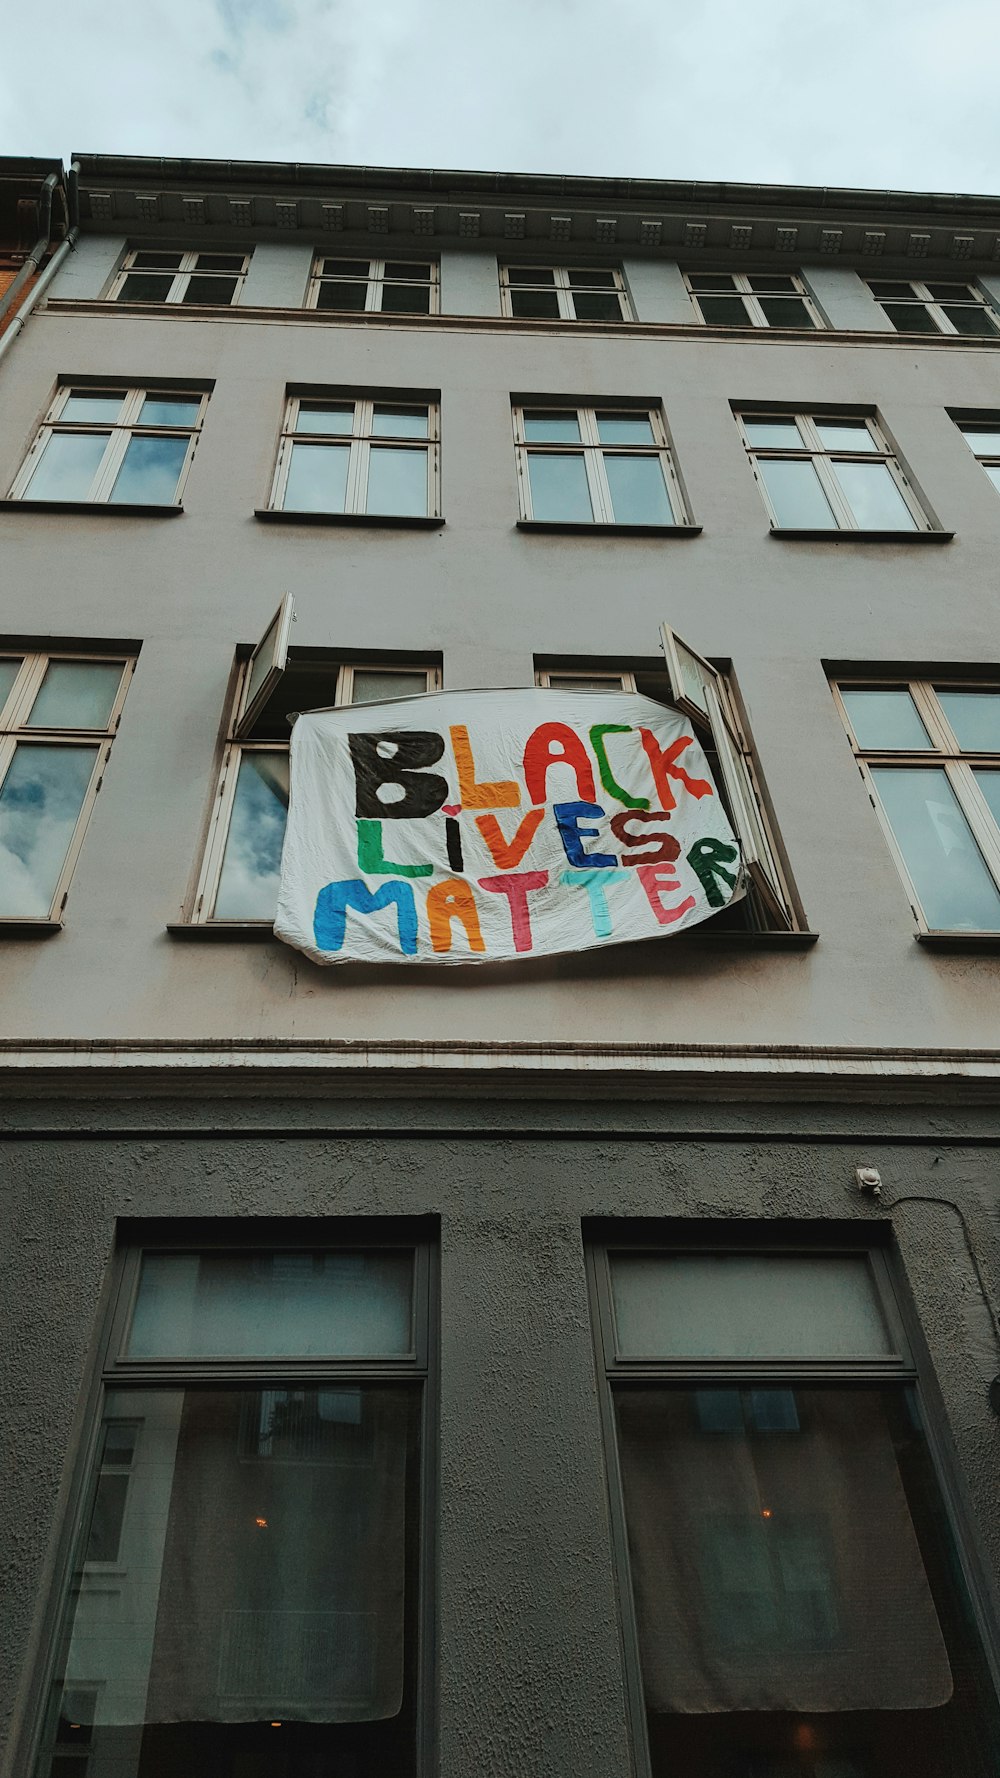 a black lives matter sign on the side of a building